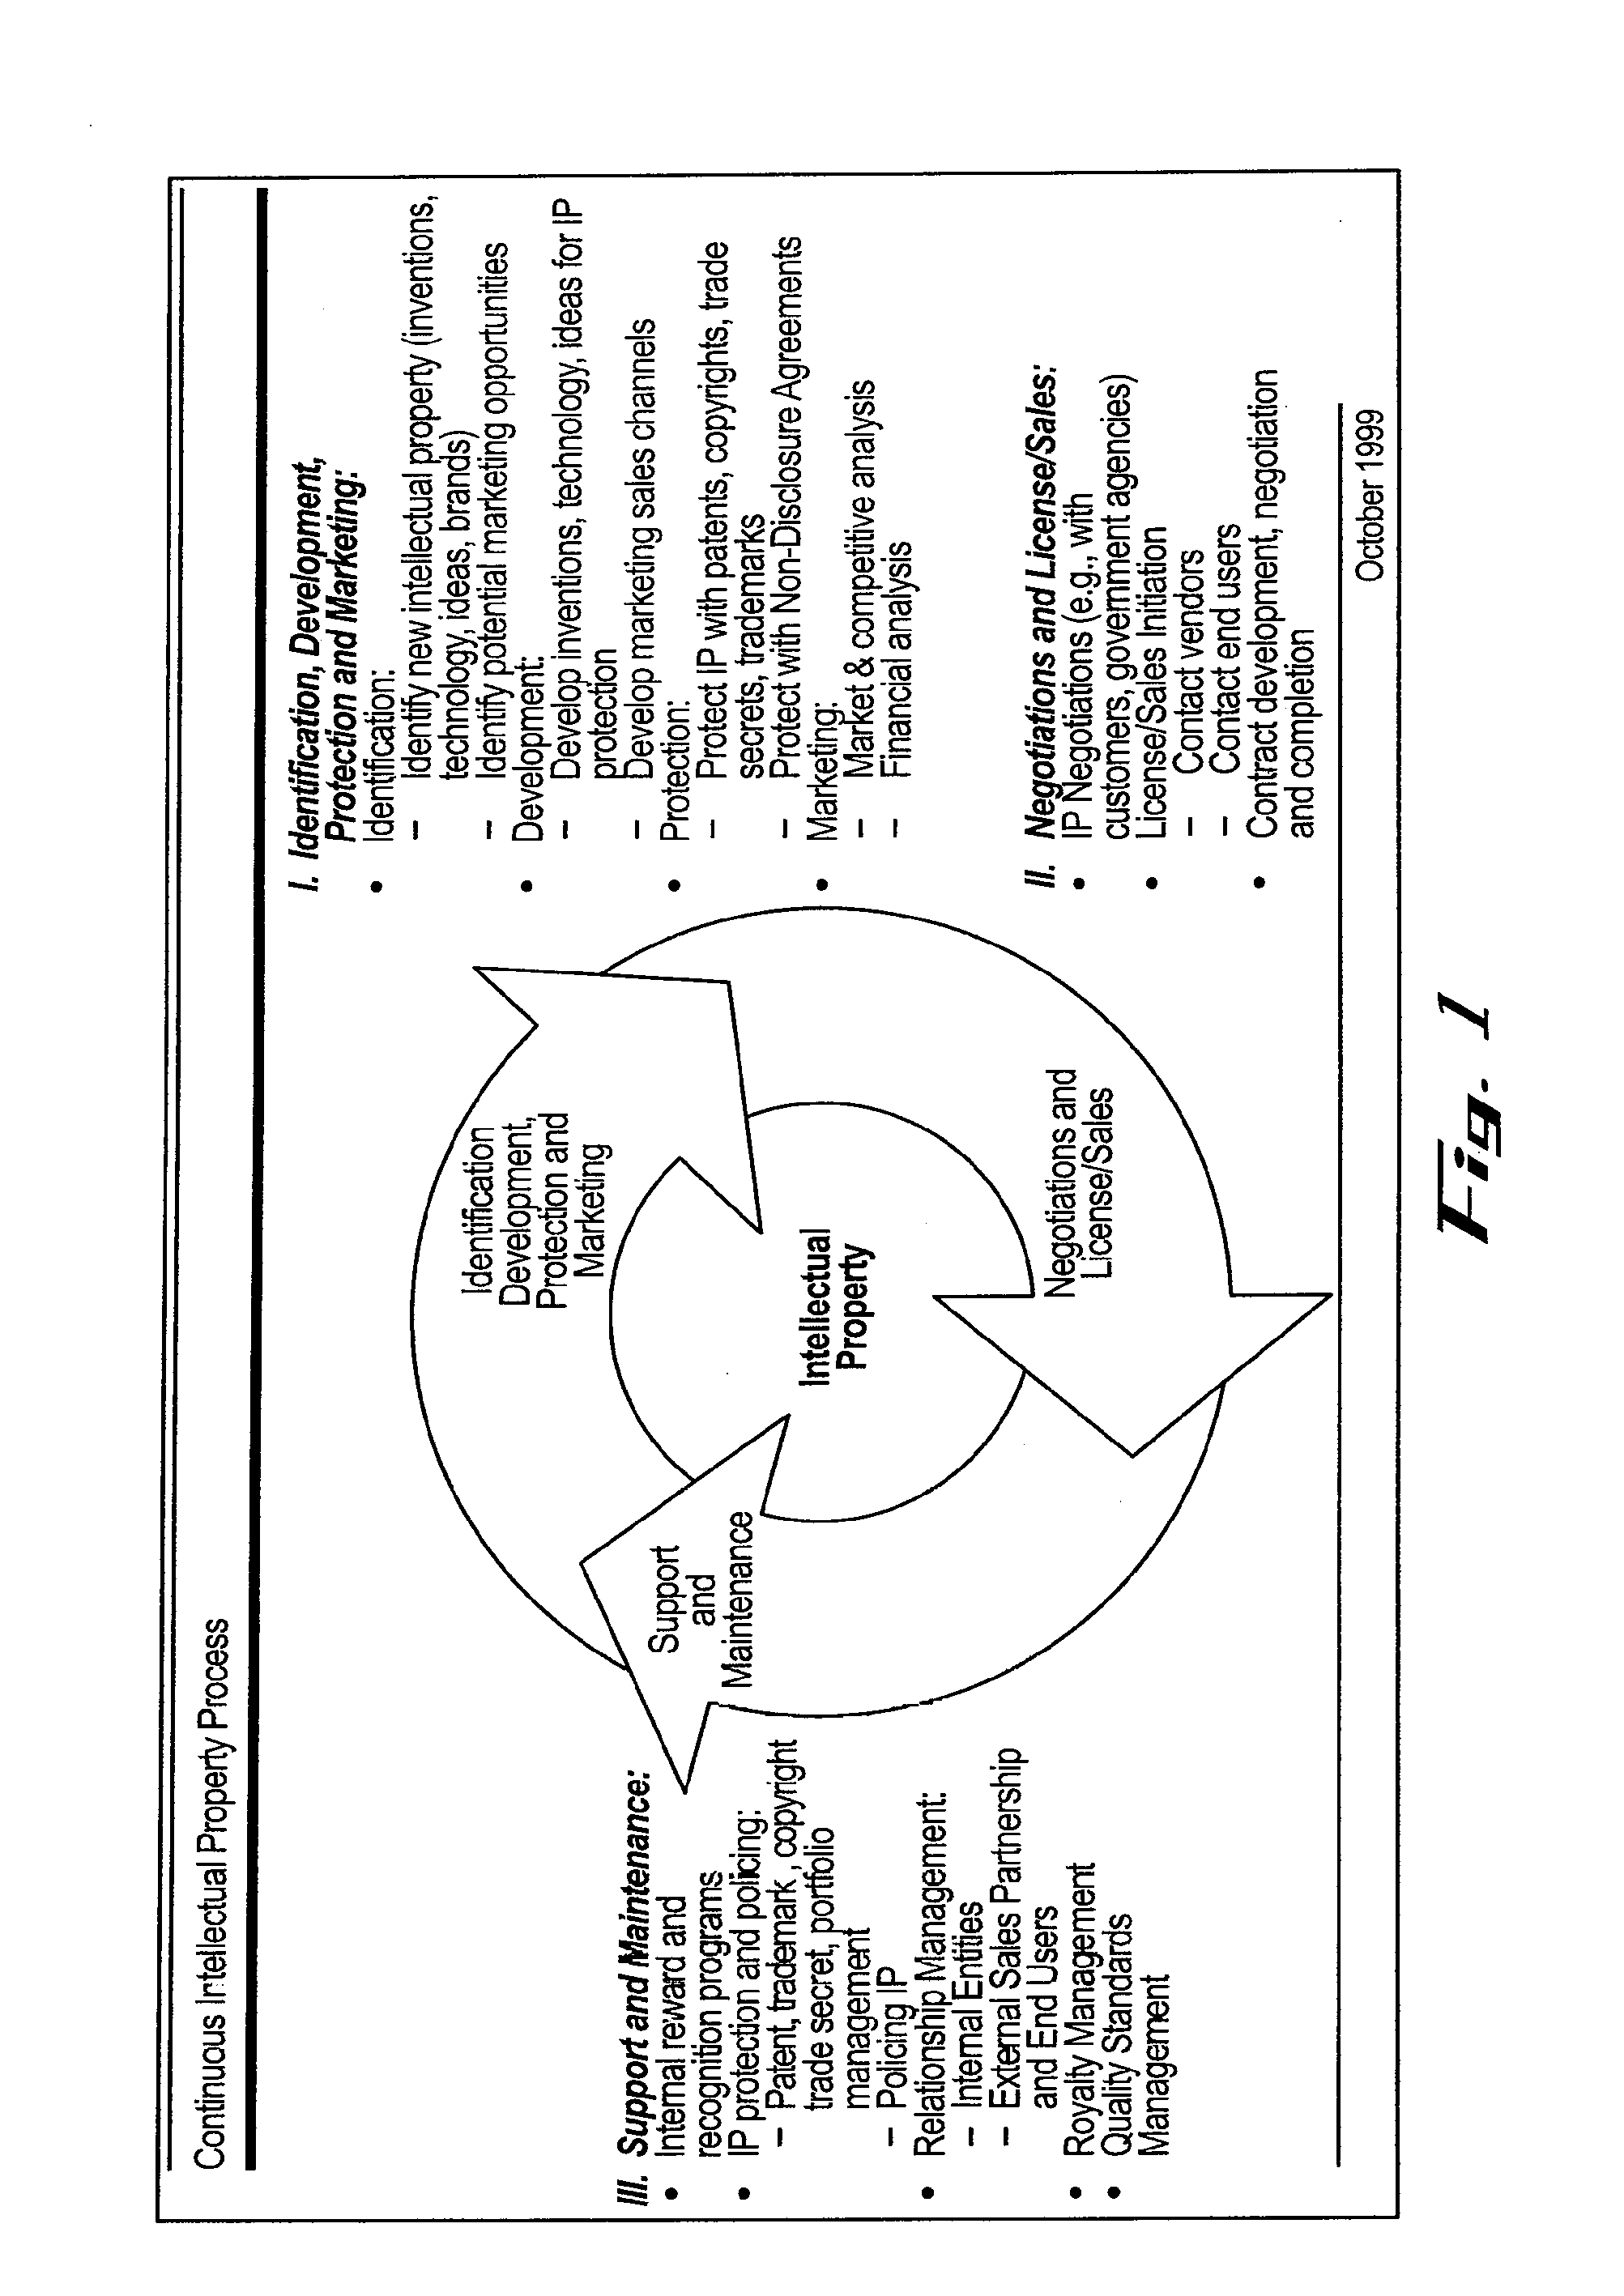 System and method for determining the marketability of intellectual property assets